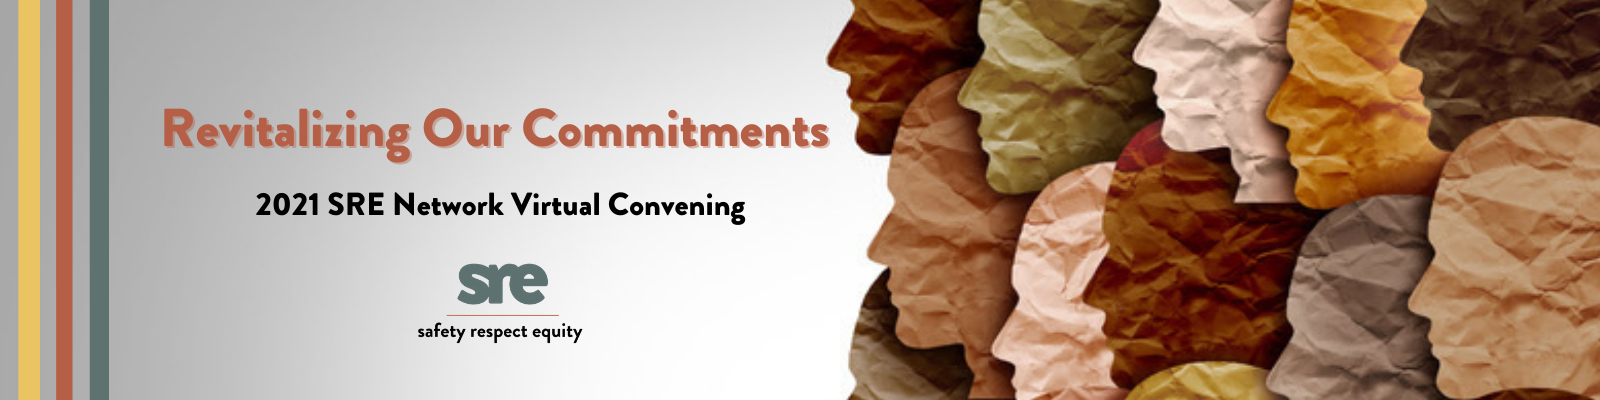 Revitalizing Our Commitments